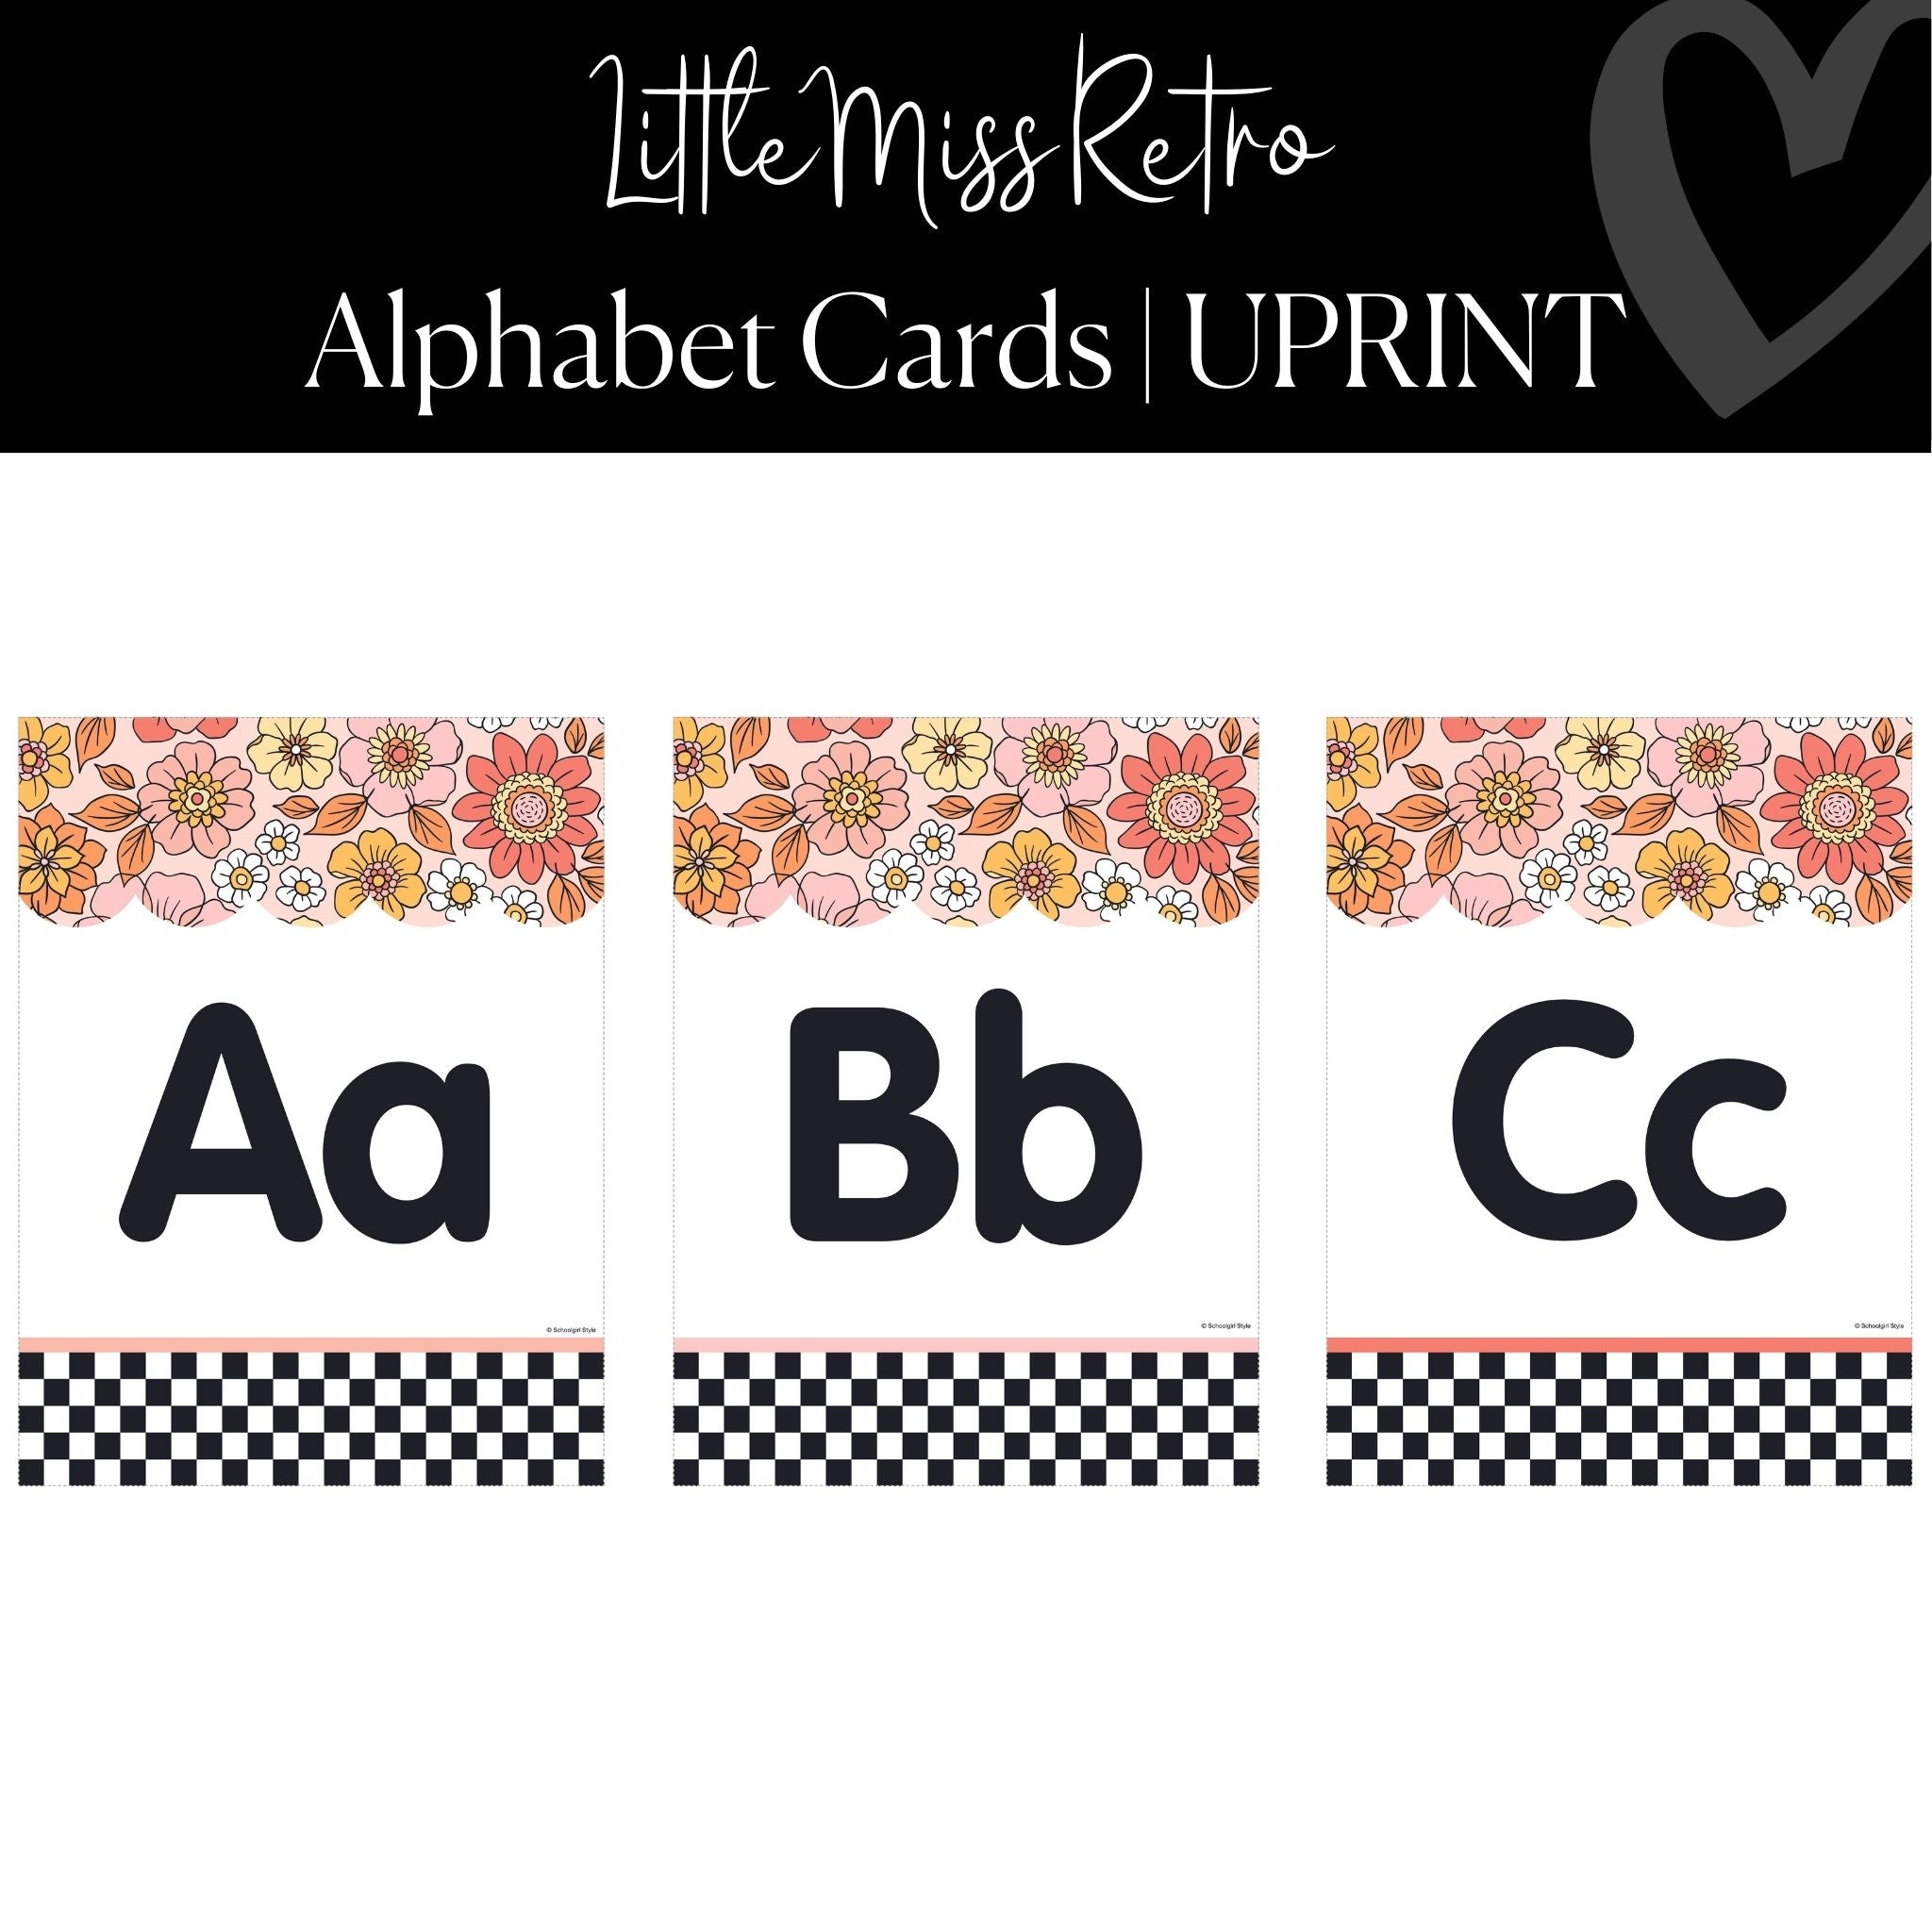 Alphabet Posters with Black Background, Classroom Decor